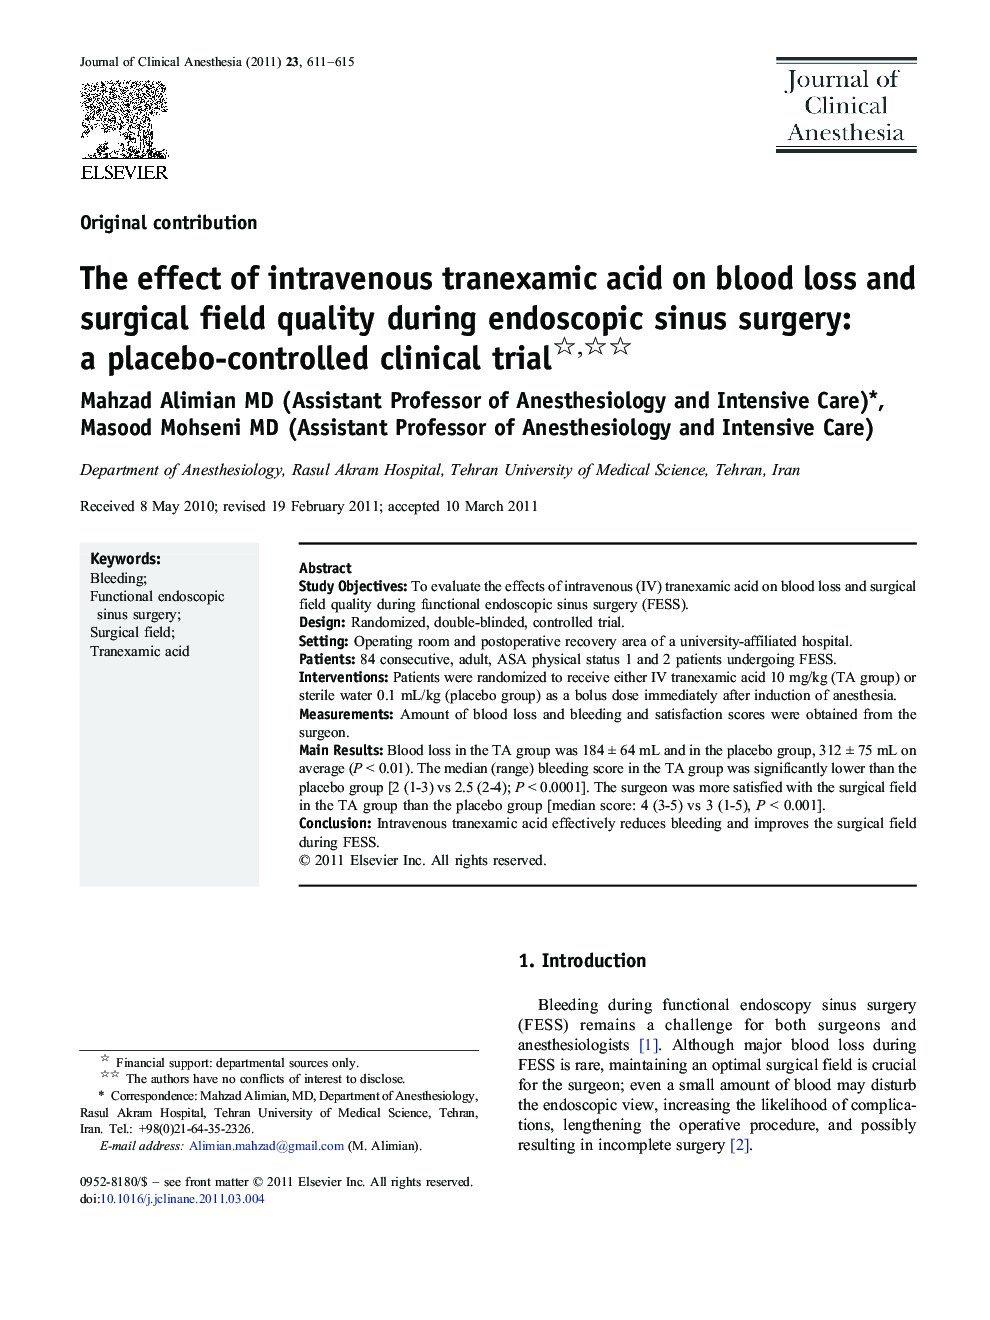 The effect of intravenous tranexamic acid on blood loss and surgical field quality during endoscopic sinus surgery: a placebo-controlled clinical trial 